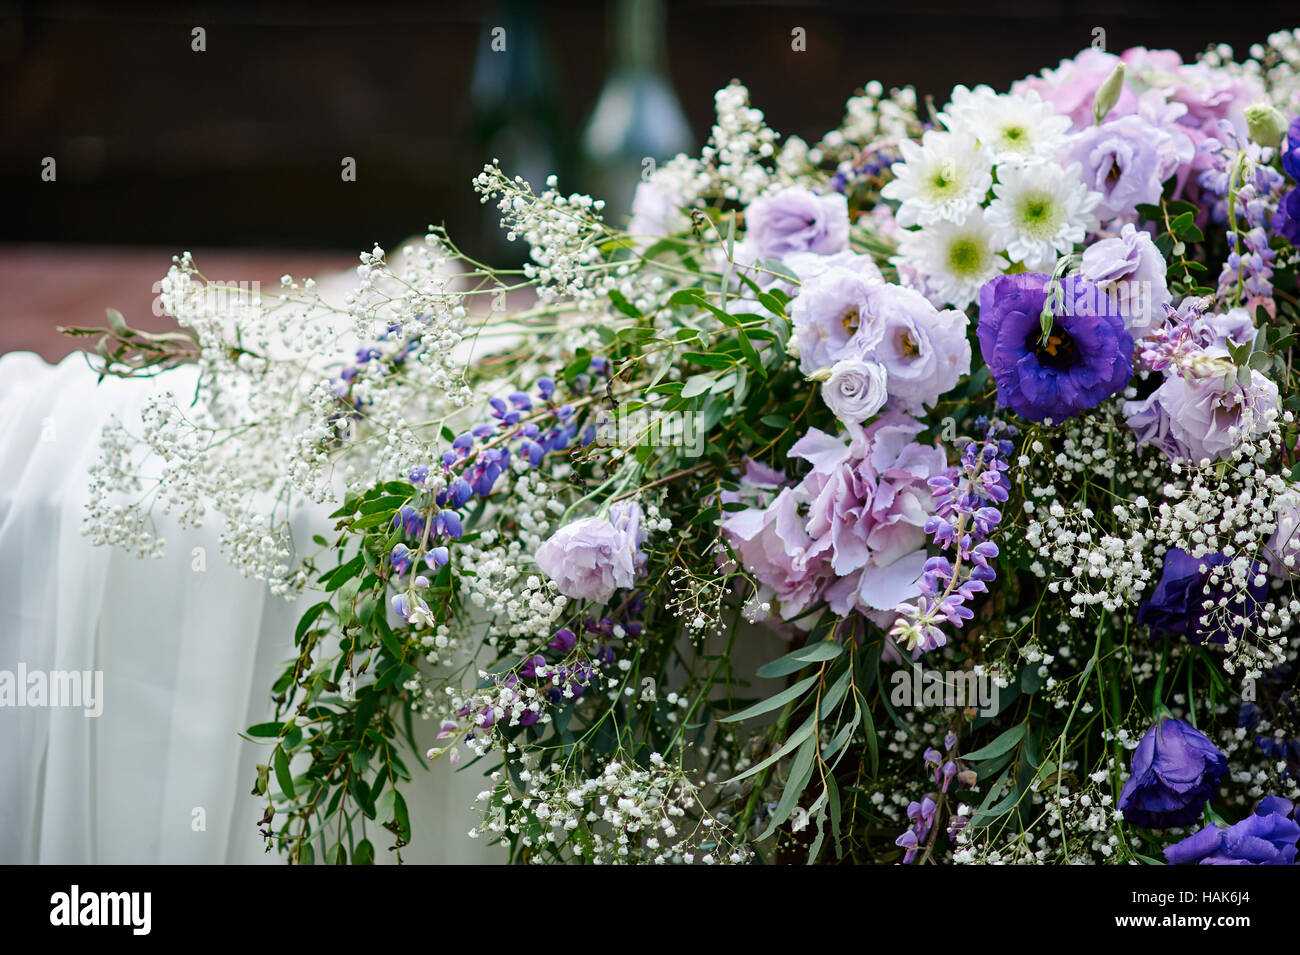 table at the wedding ceremony decorated with flowers Stock Photo